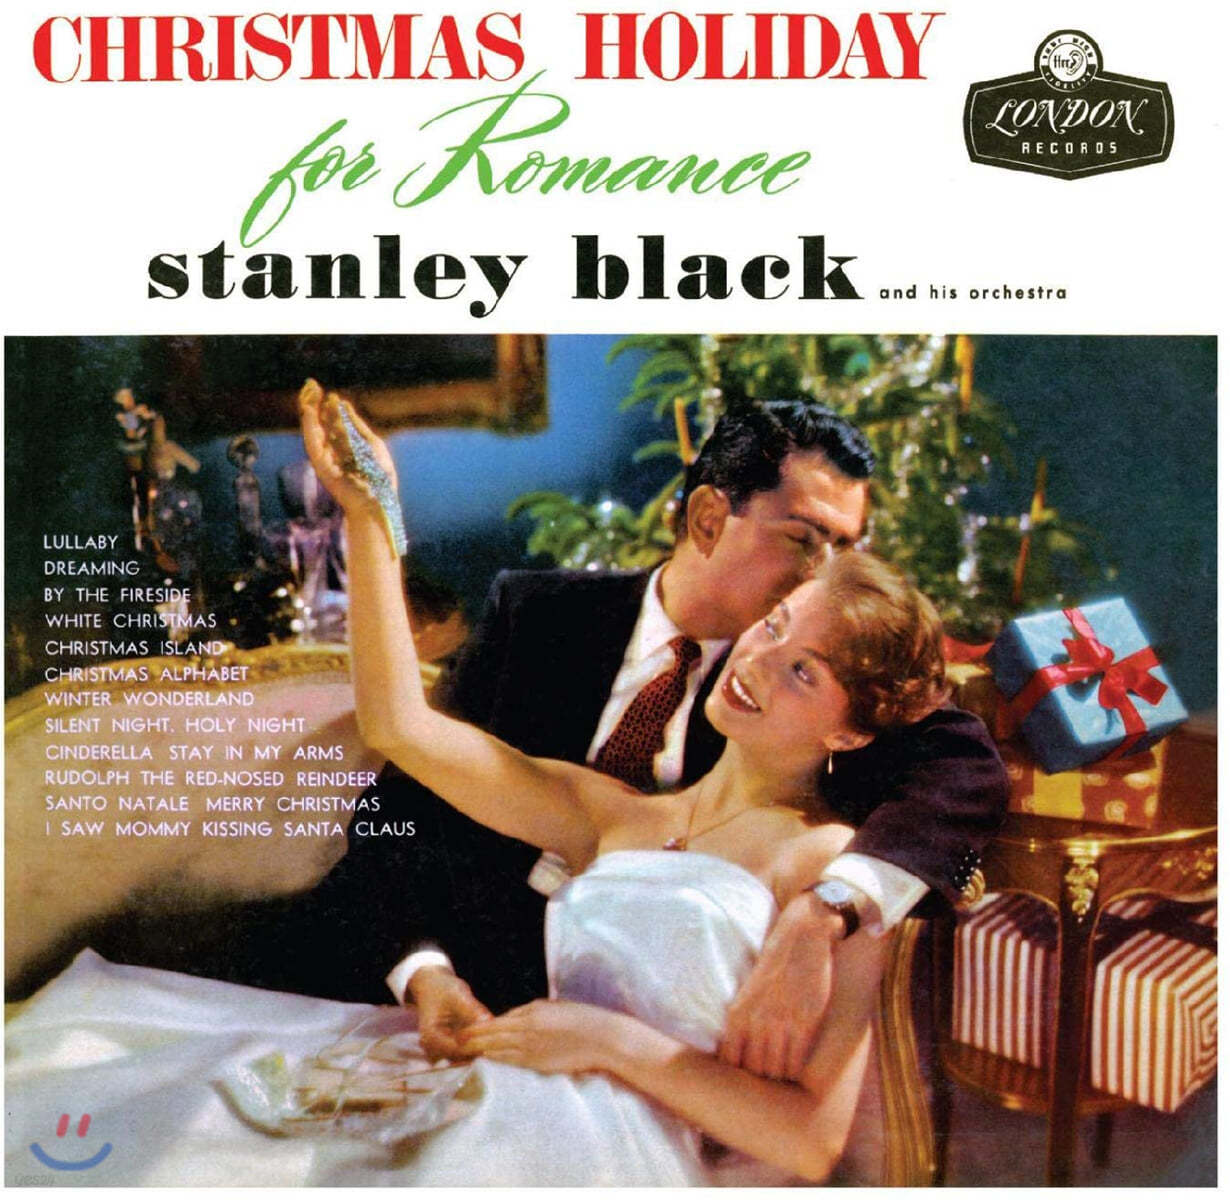 Stanley Black and His Orchestra (스탠리 블랙 오케스트라) - Christmas Holiday for Romance